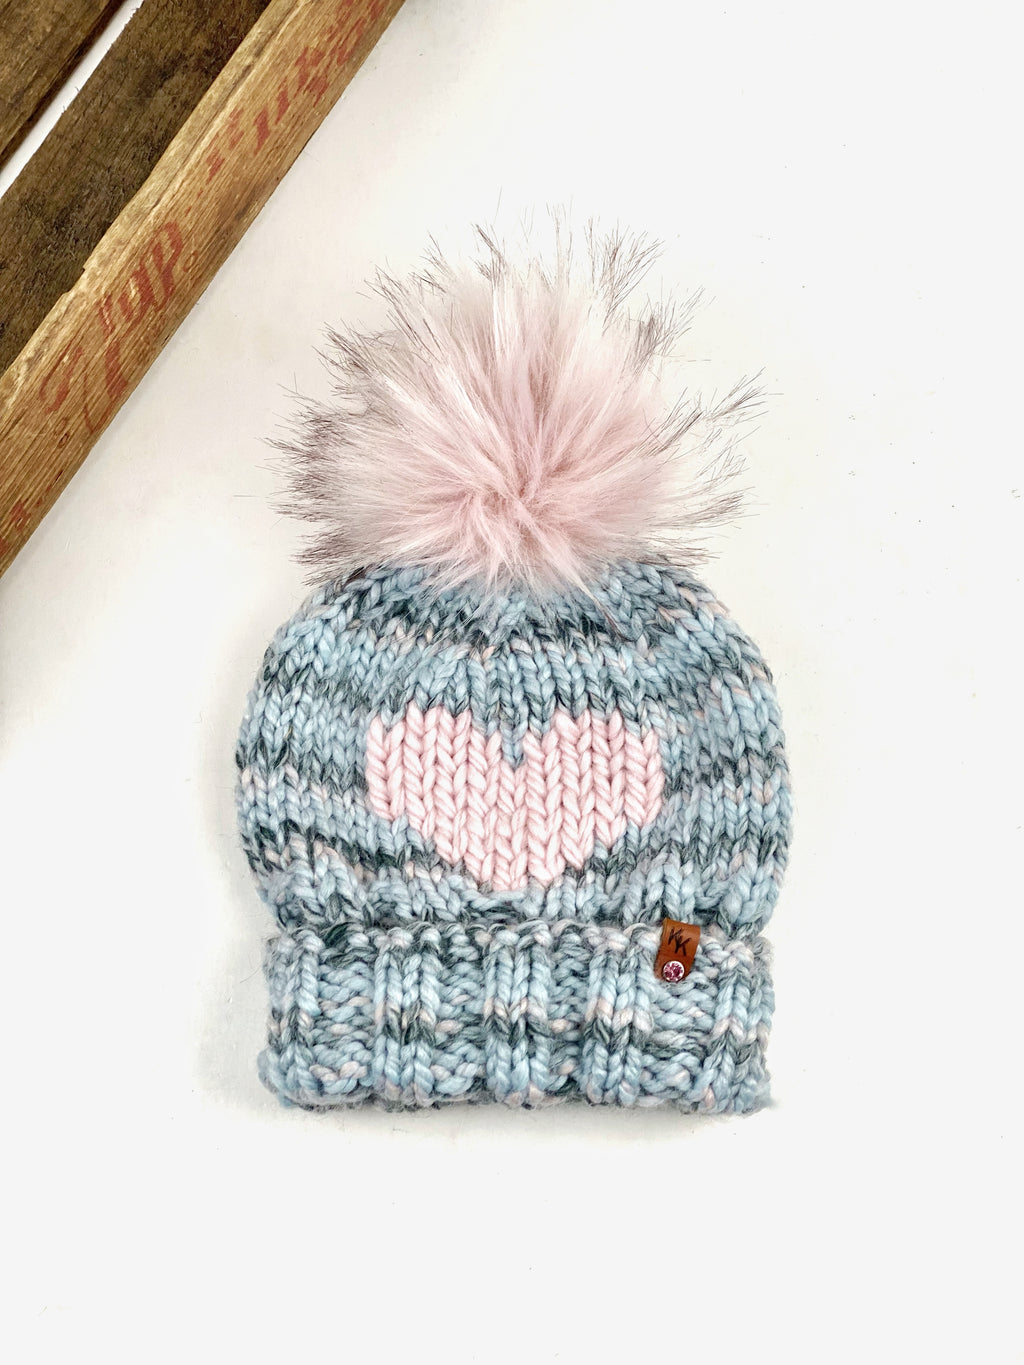 Ed's Hat Big Heart Folded Brim Beanie Adult Women's Size with Snap on Faux Fur Pom